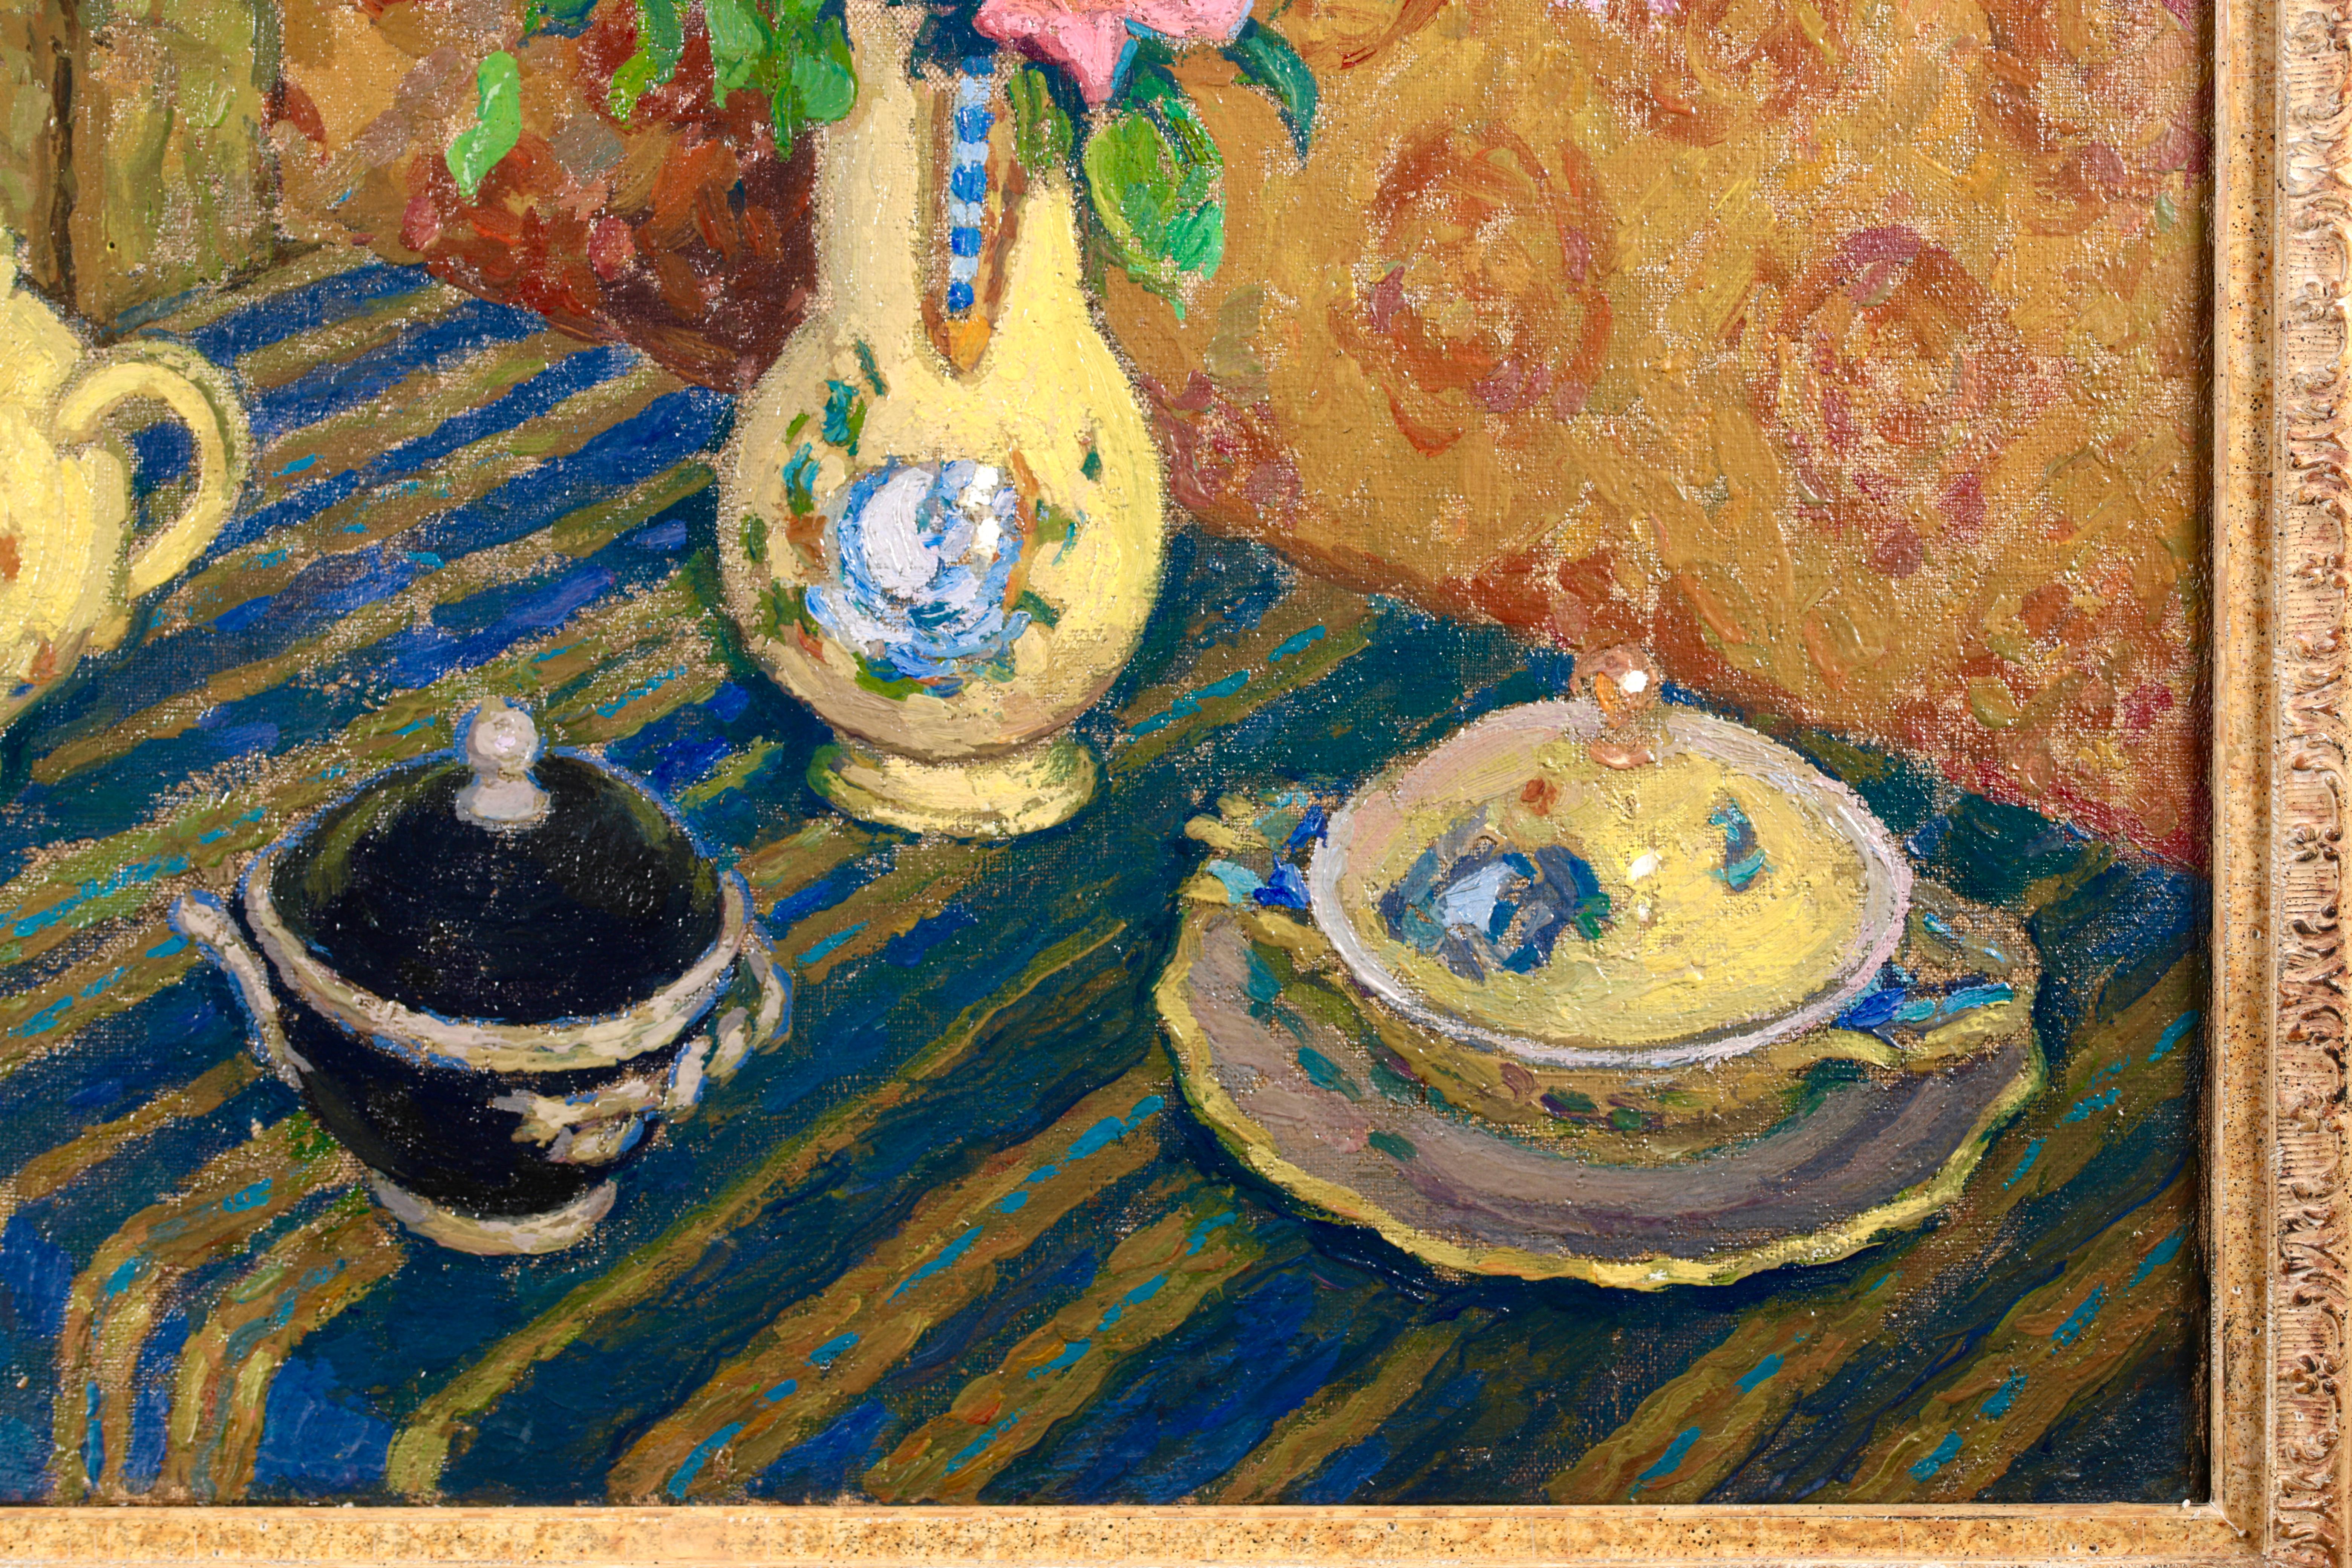 Beautiful still life oil on canvas circa 1940 by French post impressionist painter Jacques Martin-Ferrieres. The work depicts a table covered with a blue and gold striped cloth. Resting on the table is a set of yellow pottery with blue flowers,